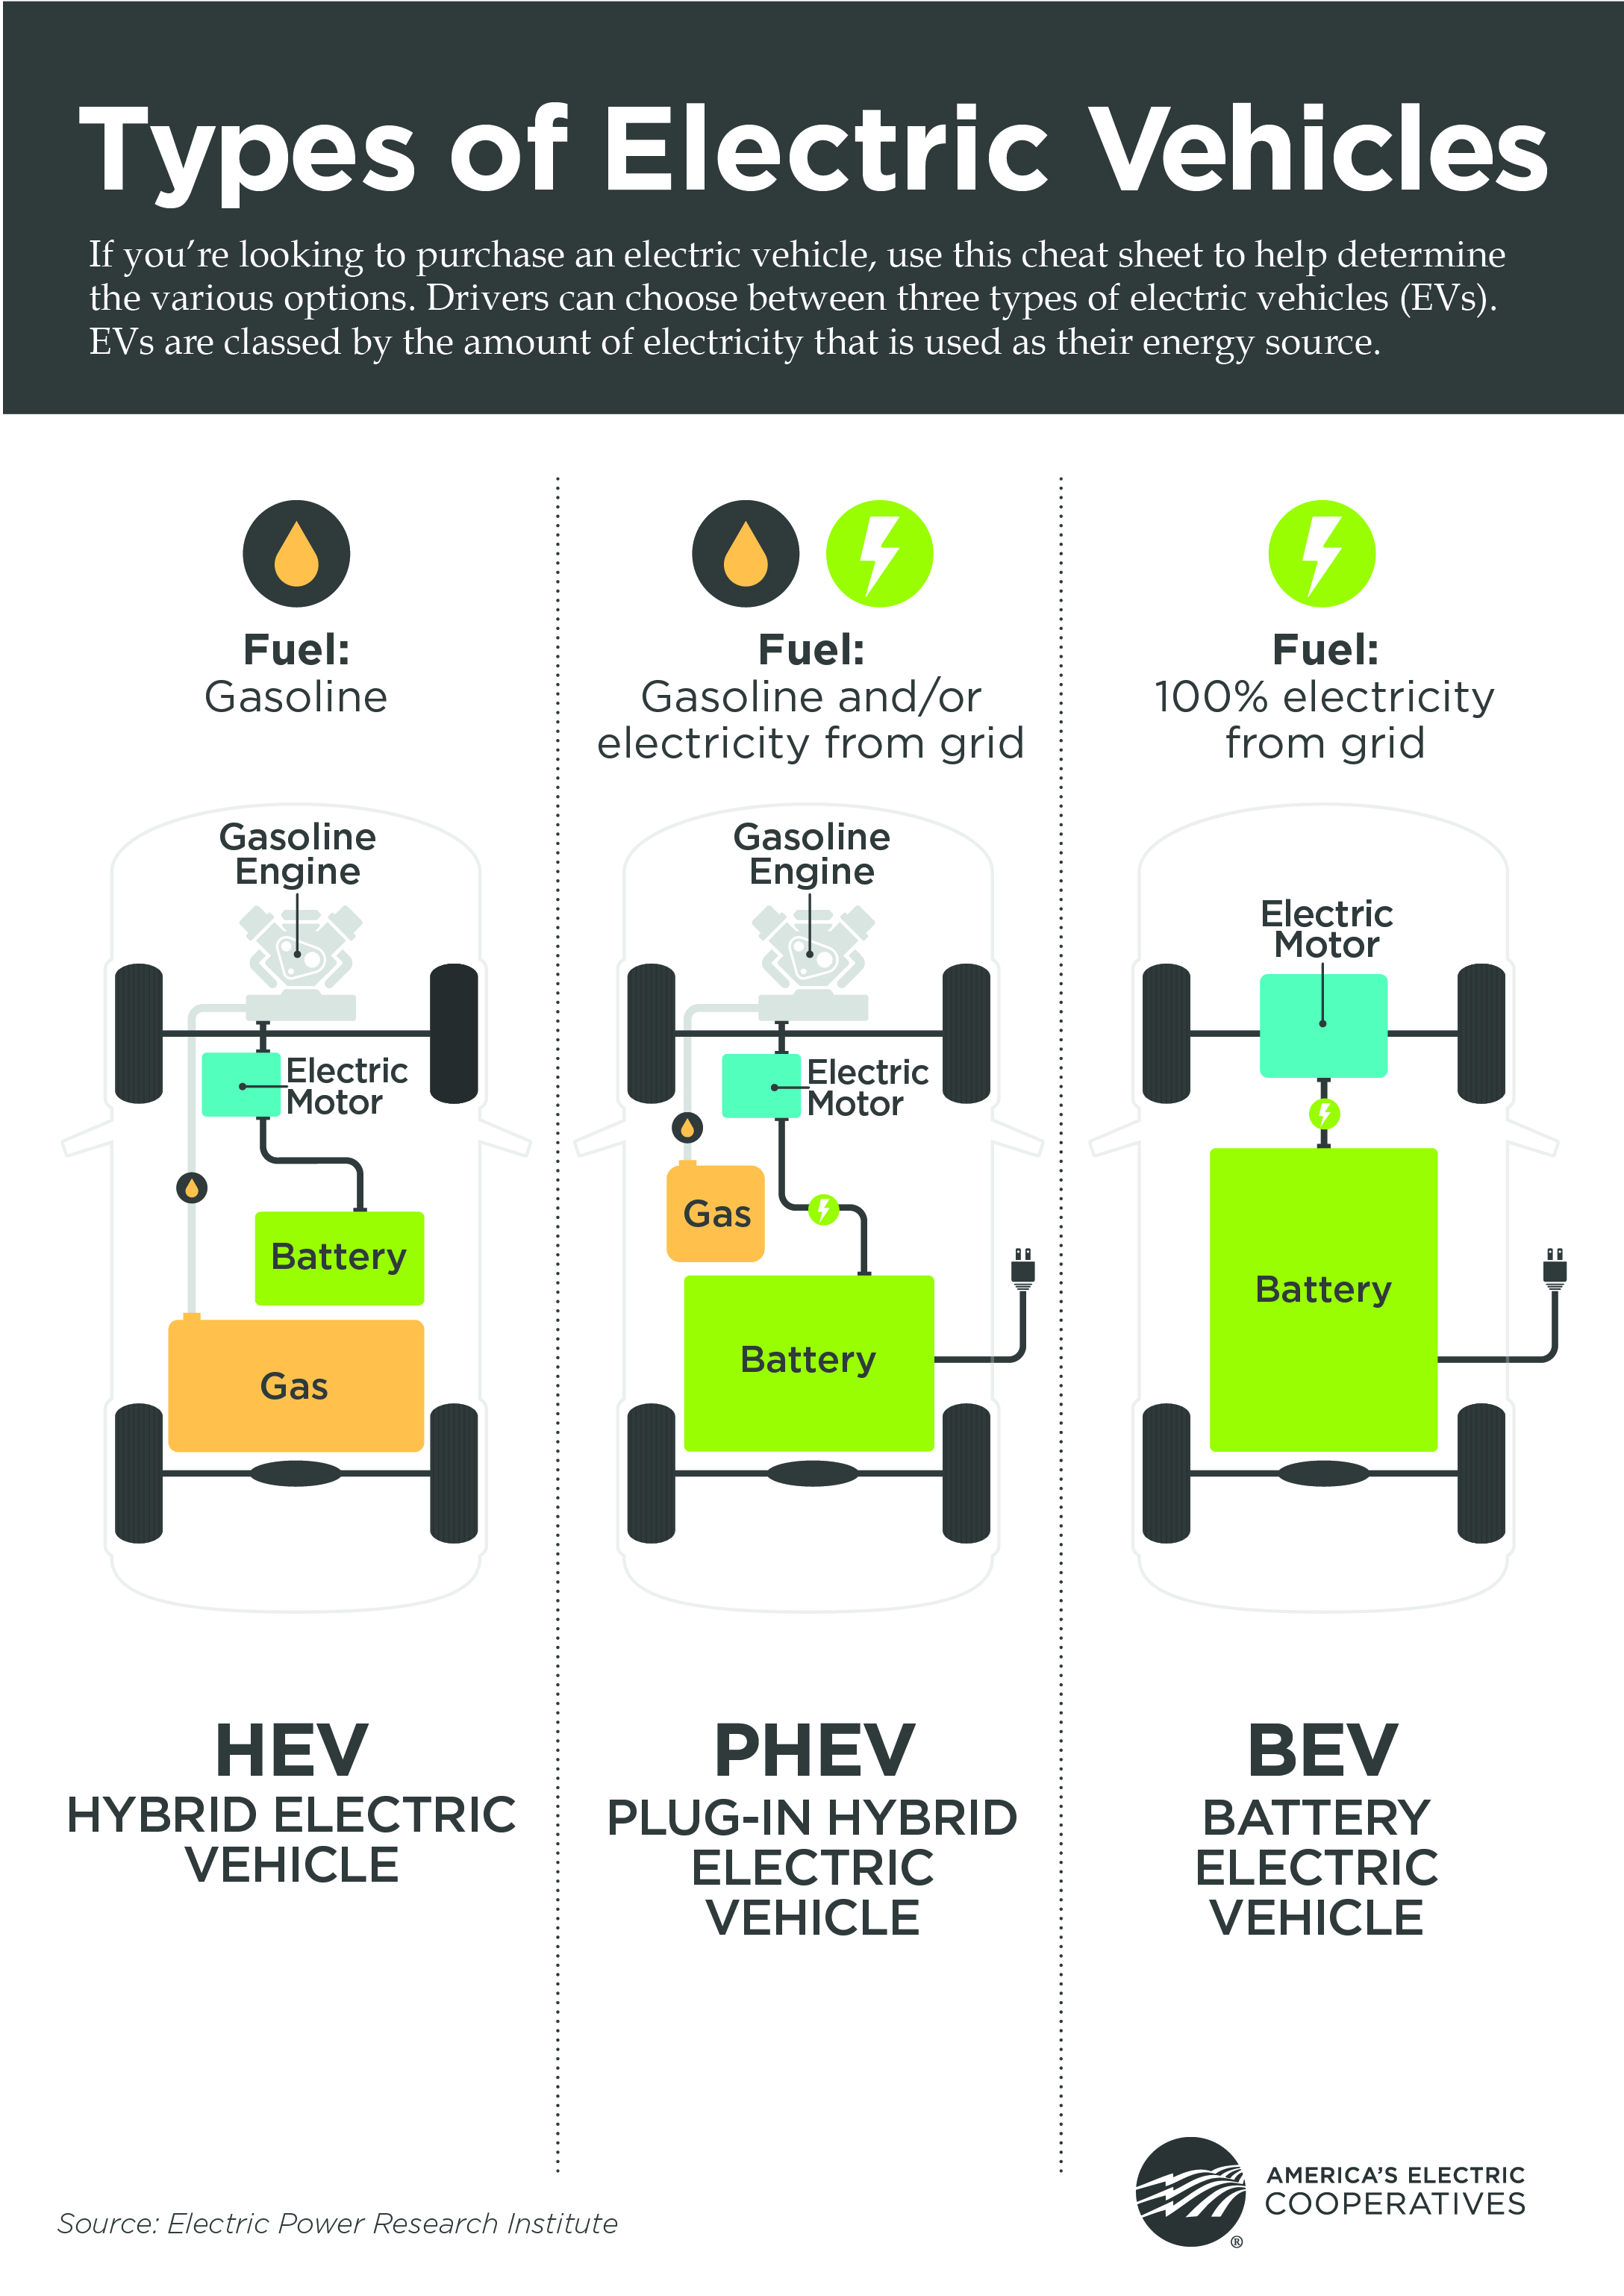 Types of EVs graphic